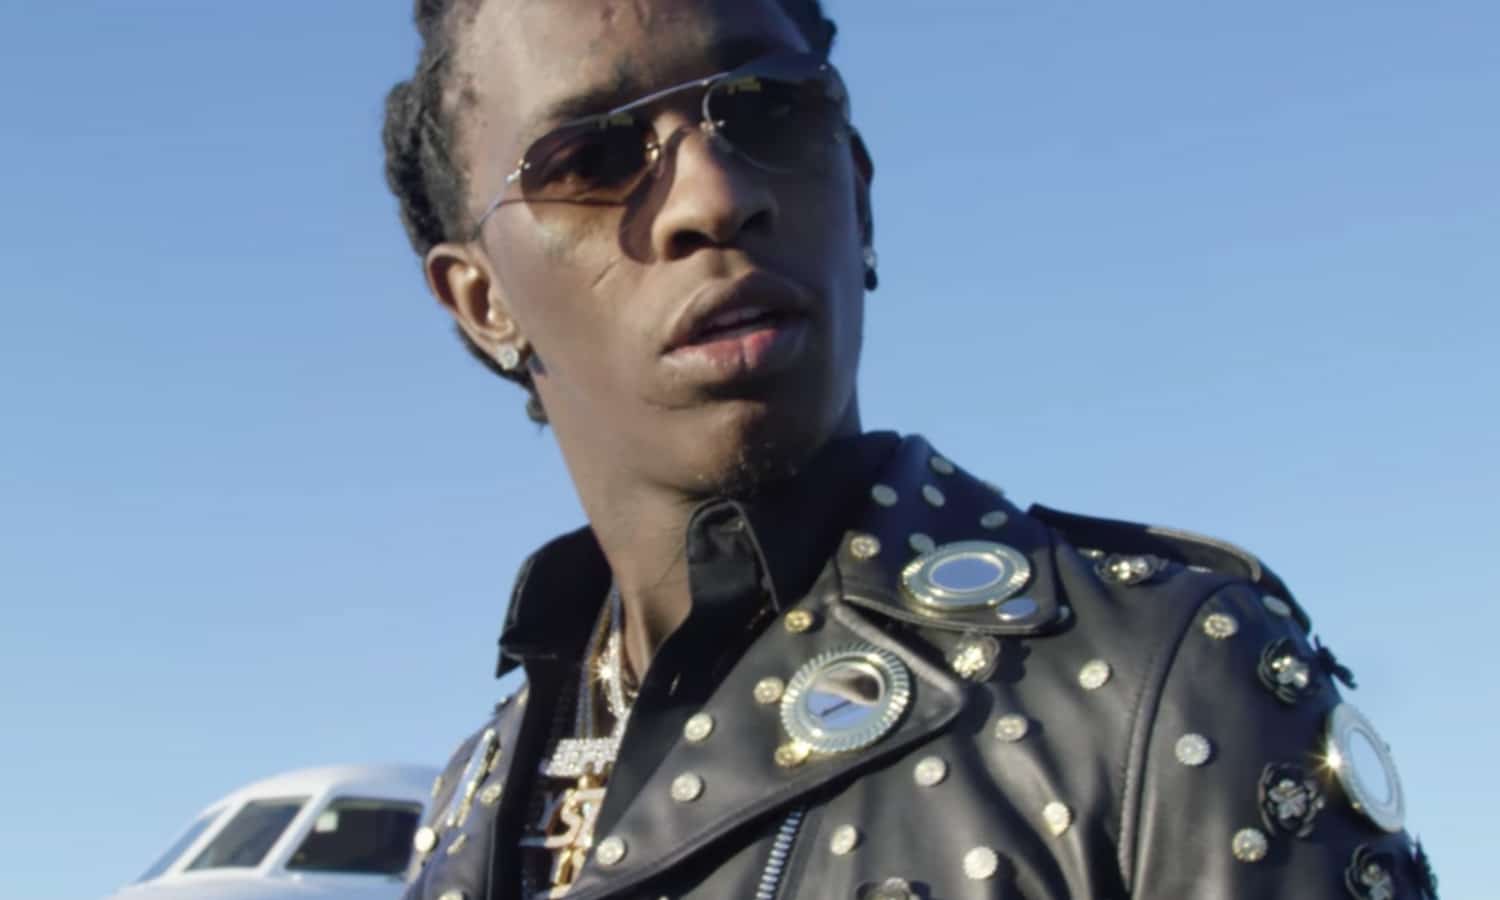 This Insane Young Thug Video Is Going Viral For The Best Reason1500 x 900